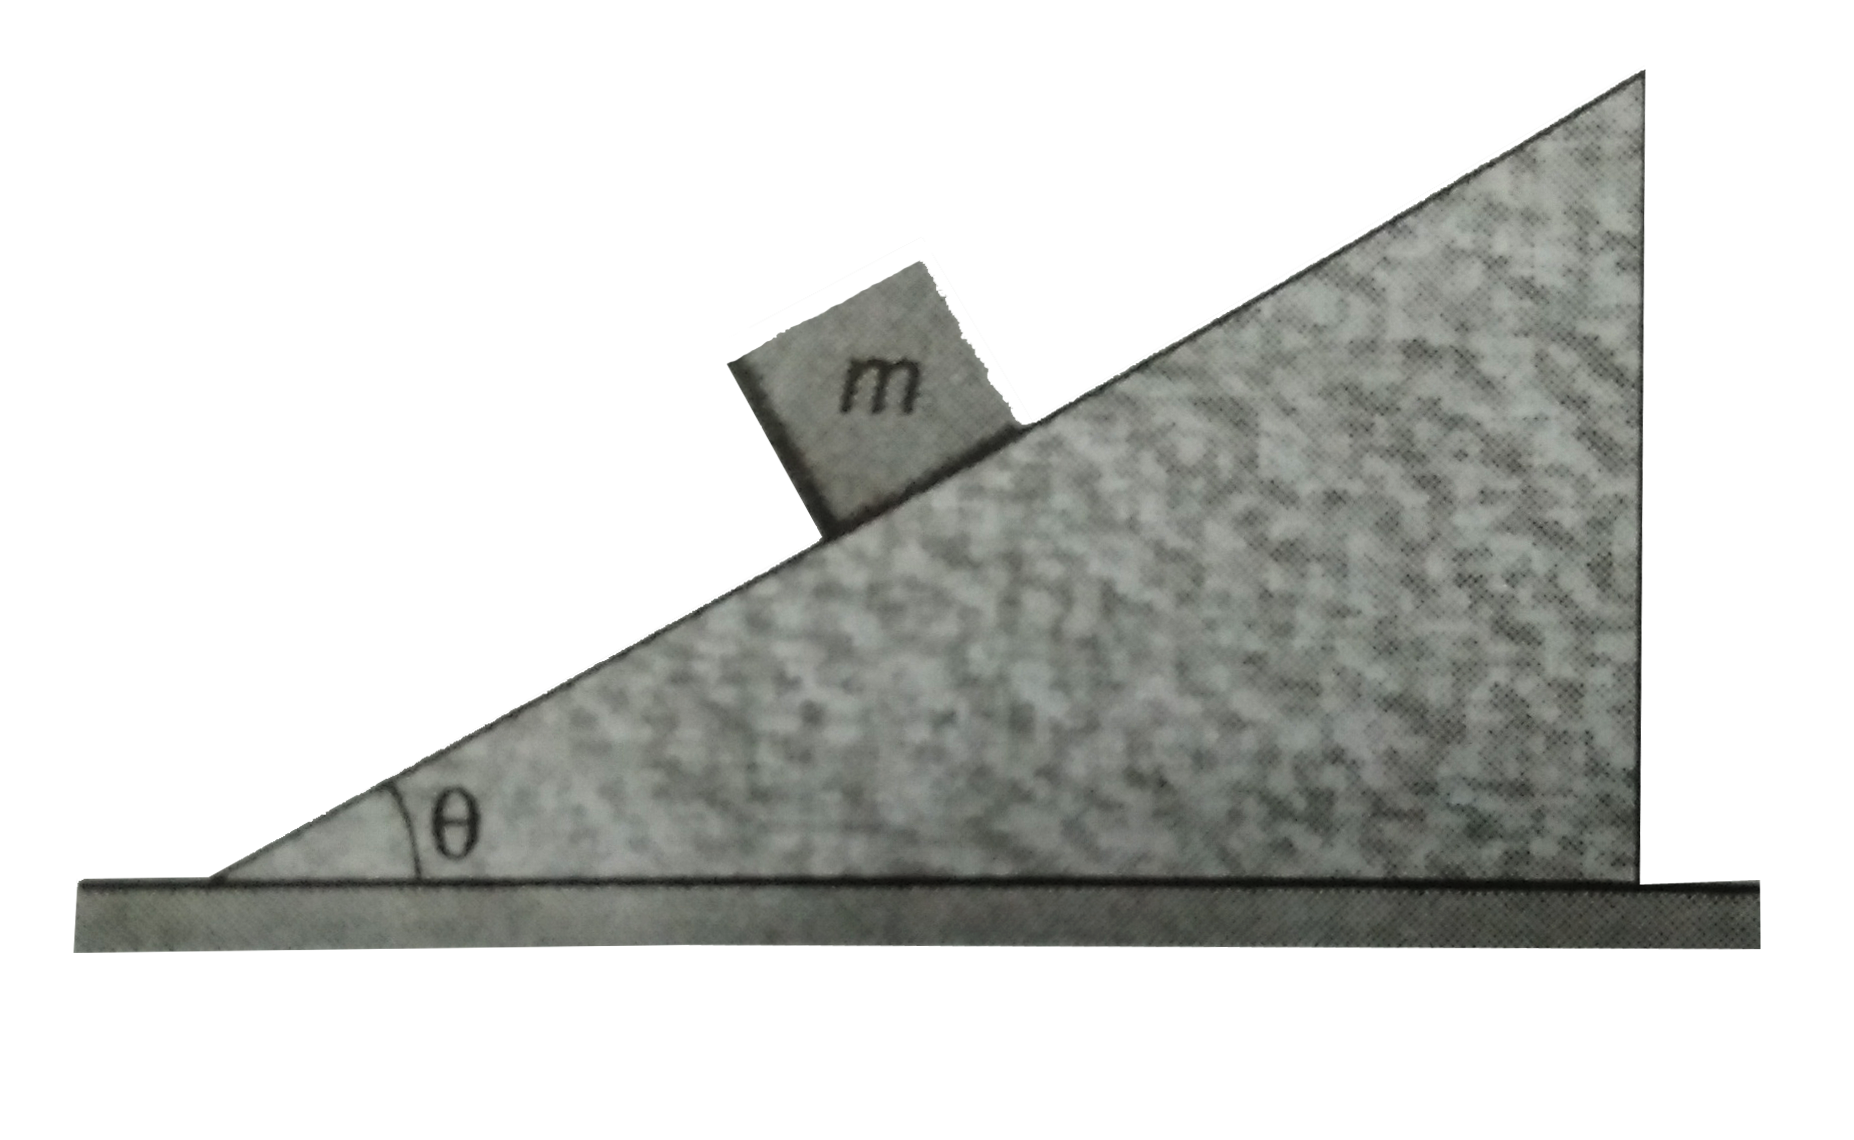 A block of mass m is at rest on a rough wedge as shown in figure. What is the force exerted by the wedge on the block?